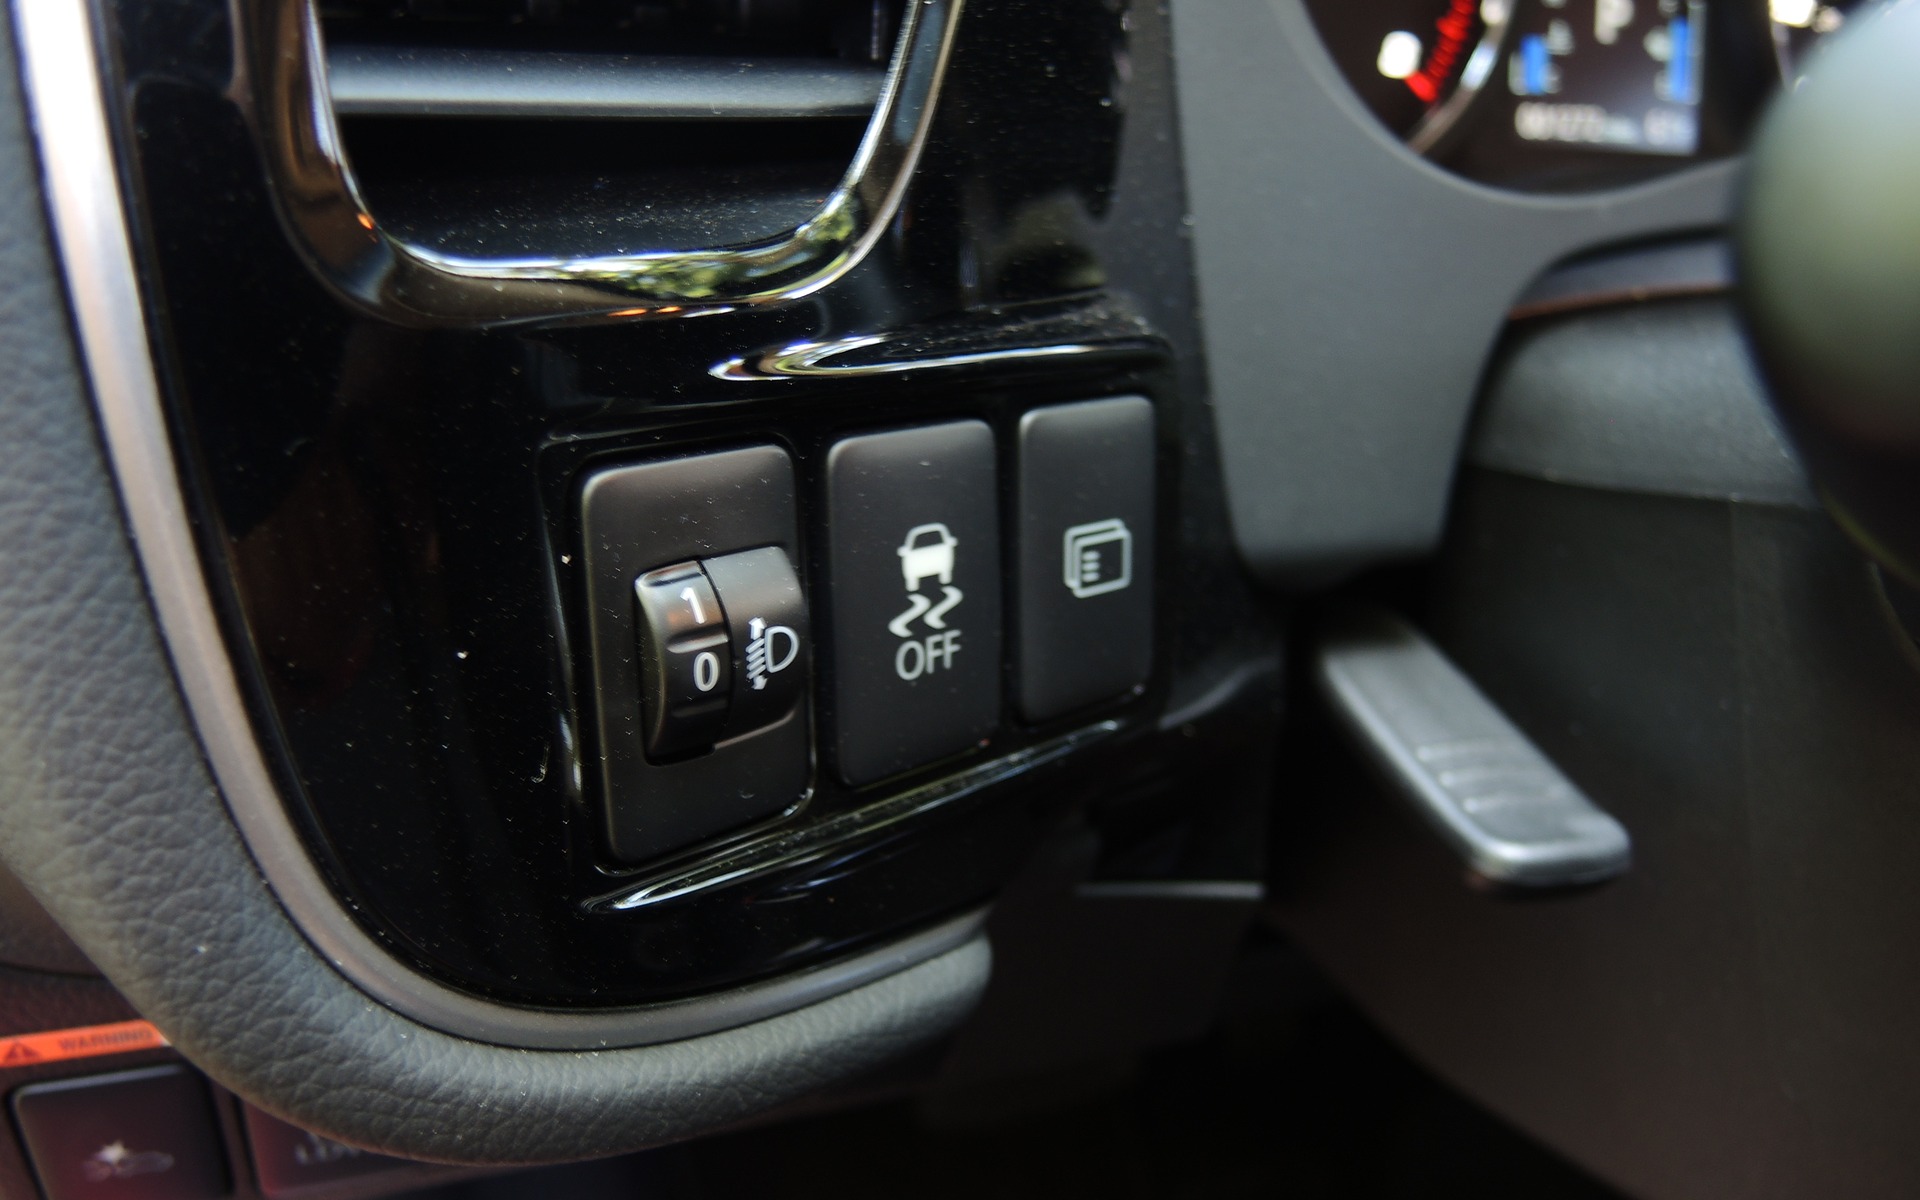 Some controls are hard to reach in the Outlander.